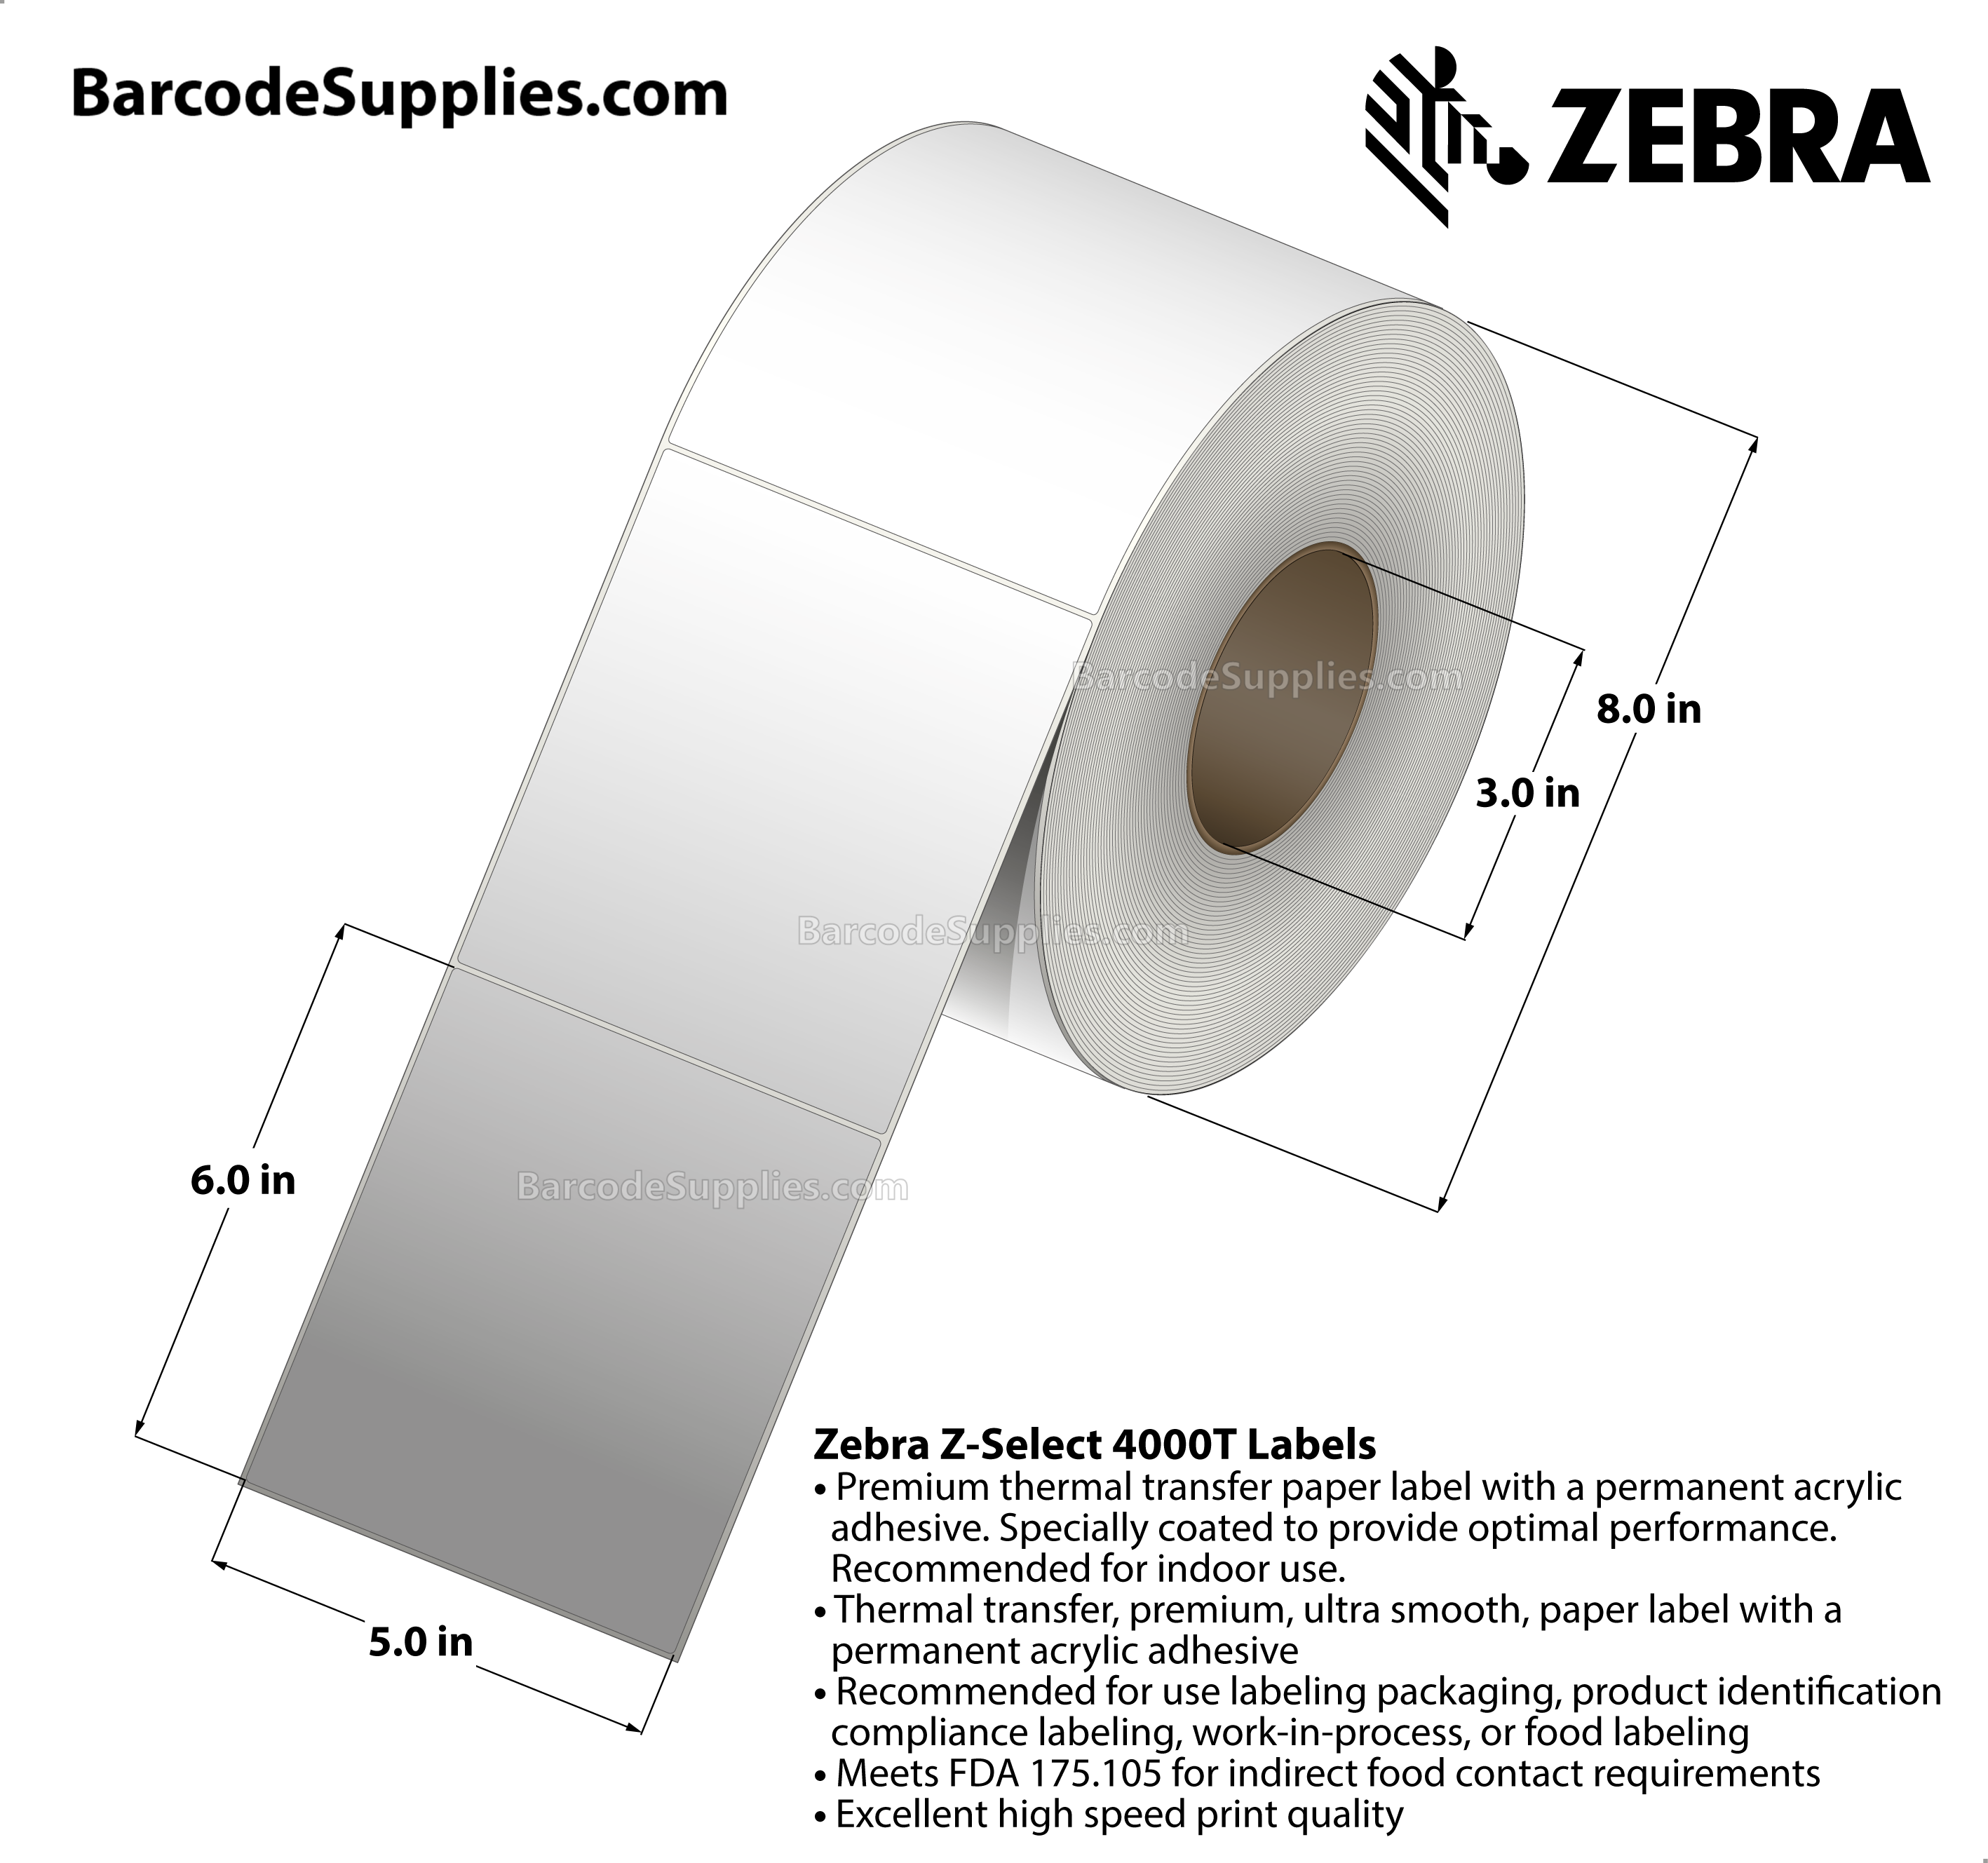 5 x 6 Thermal Transfer White Z-Select 4000T Labels With Permanent Adhesive - Not Perforated - 960 Labels Per Roll - Carton Of 4 Rolls - 3840 Labels Total - MPN: 72301